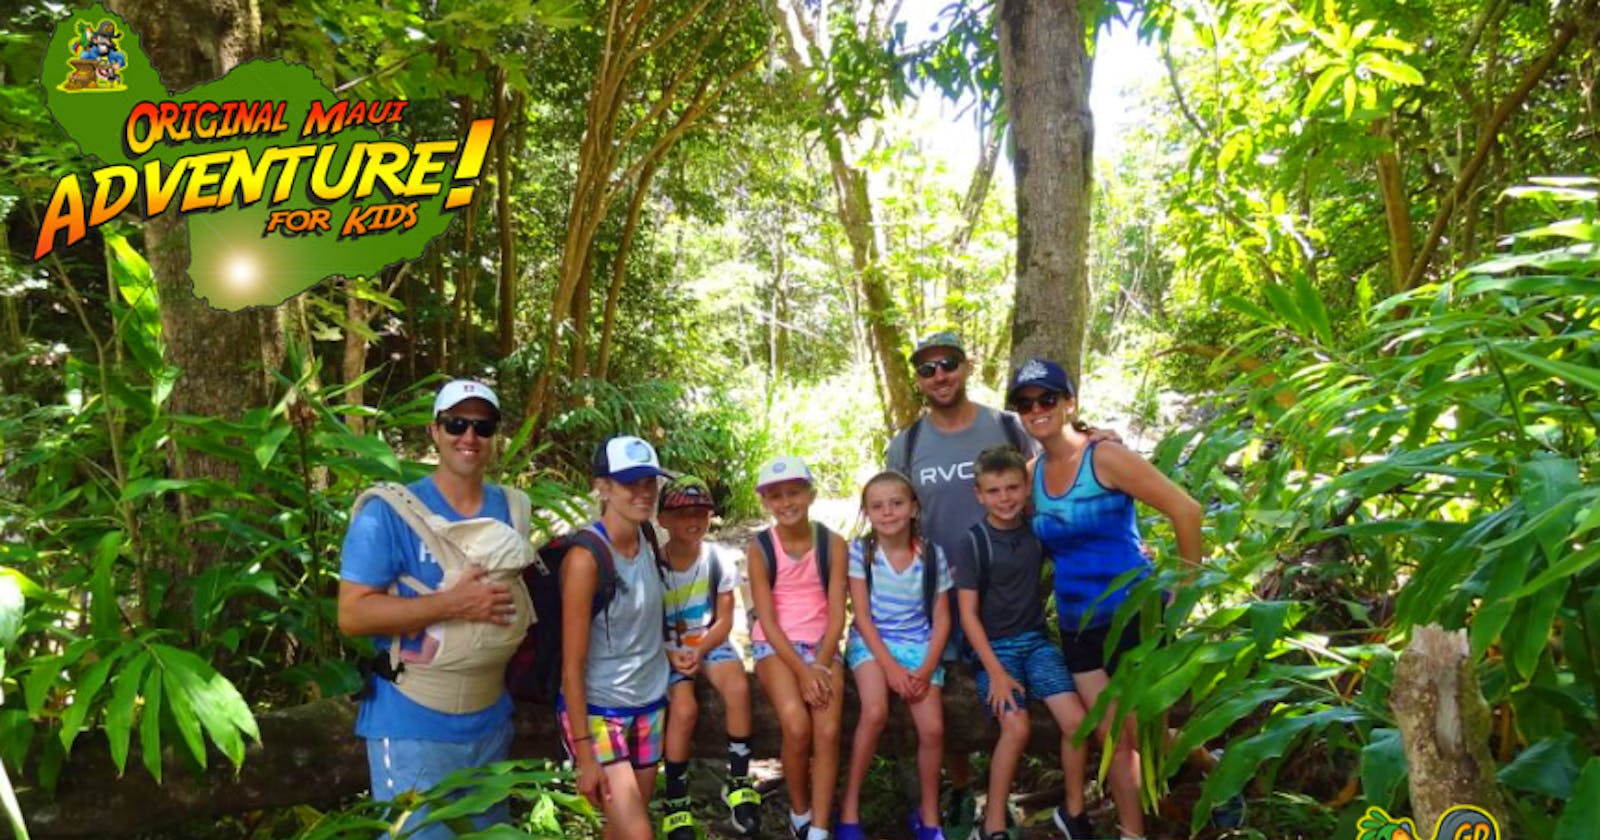 Exciting Maui Treasure Hunt Adventure – Perfect for Your Children